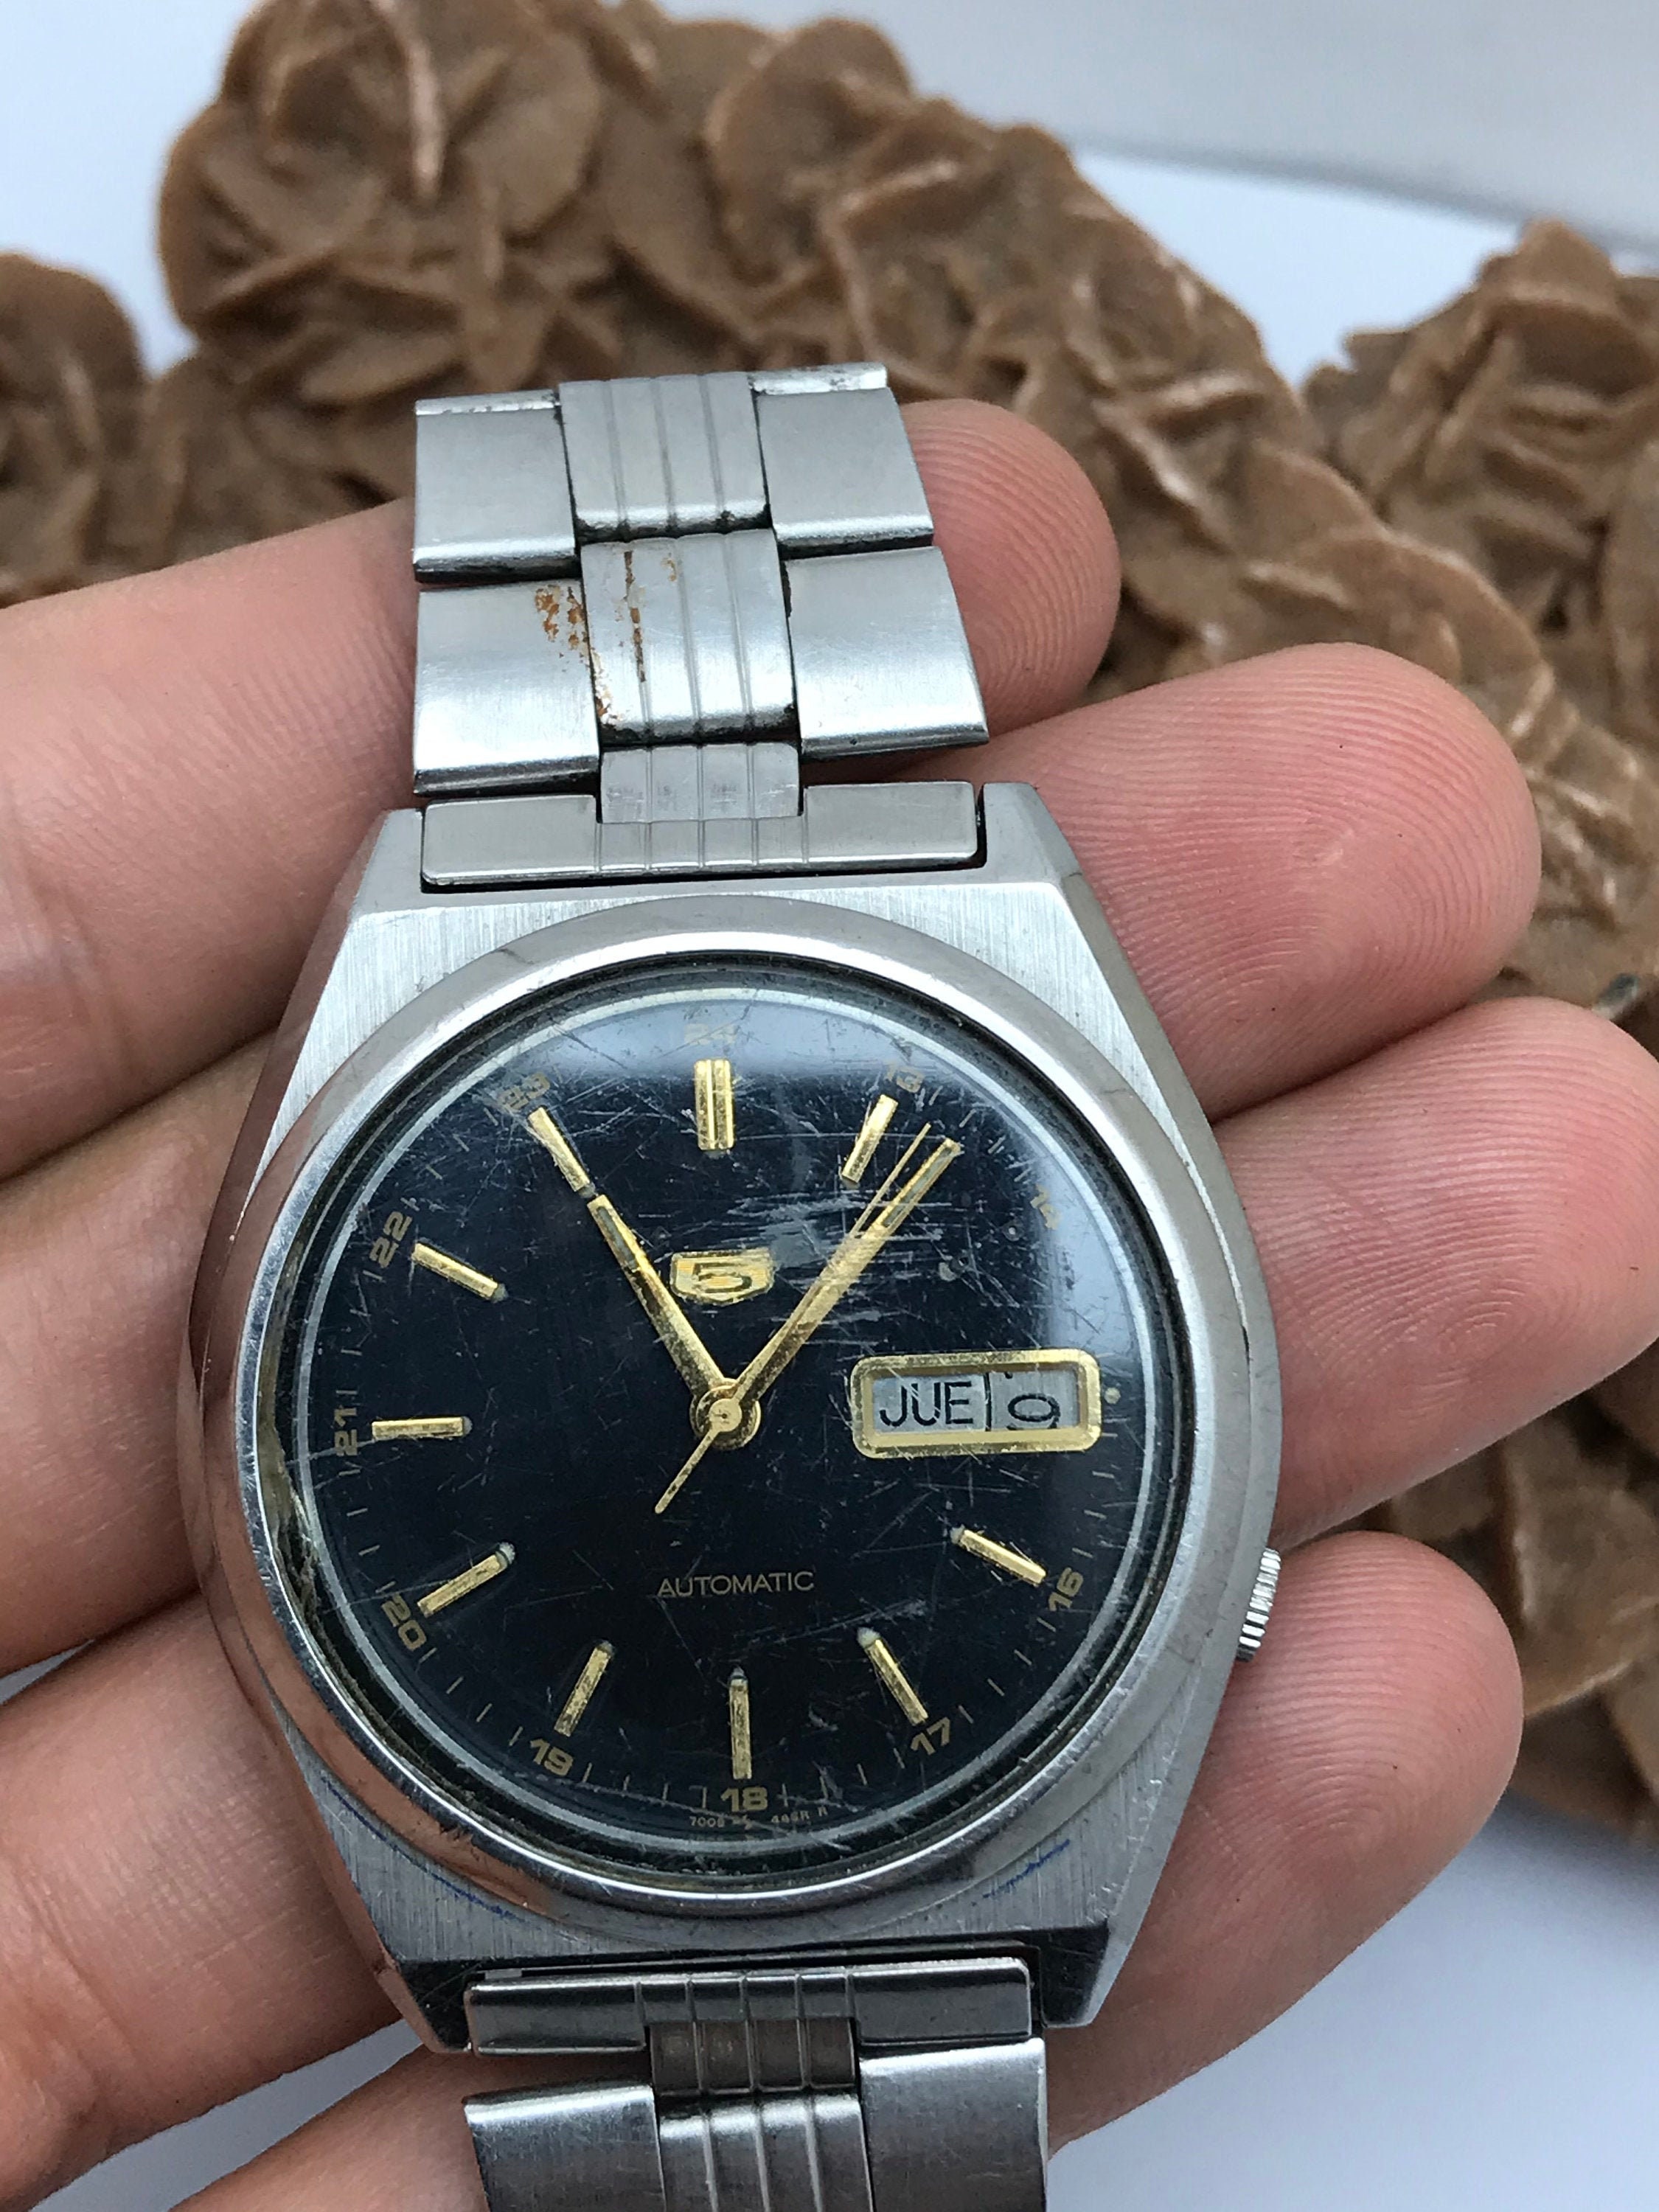 SOLD 1983 Seiko Automatic 7009-8750 Birth Year Watches 